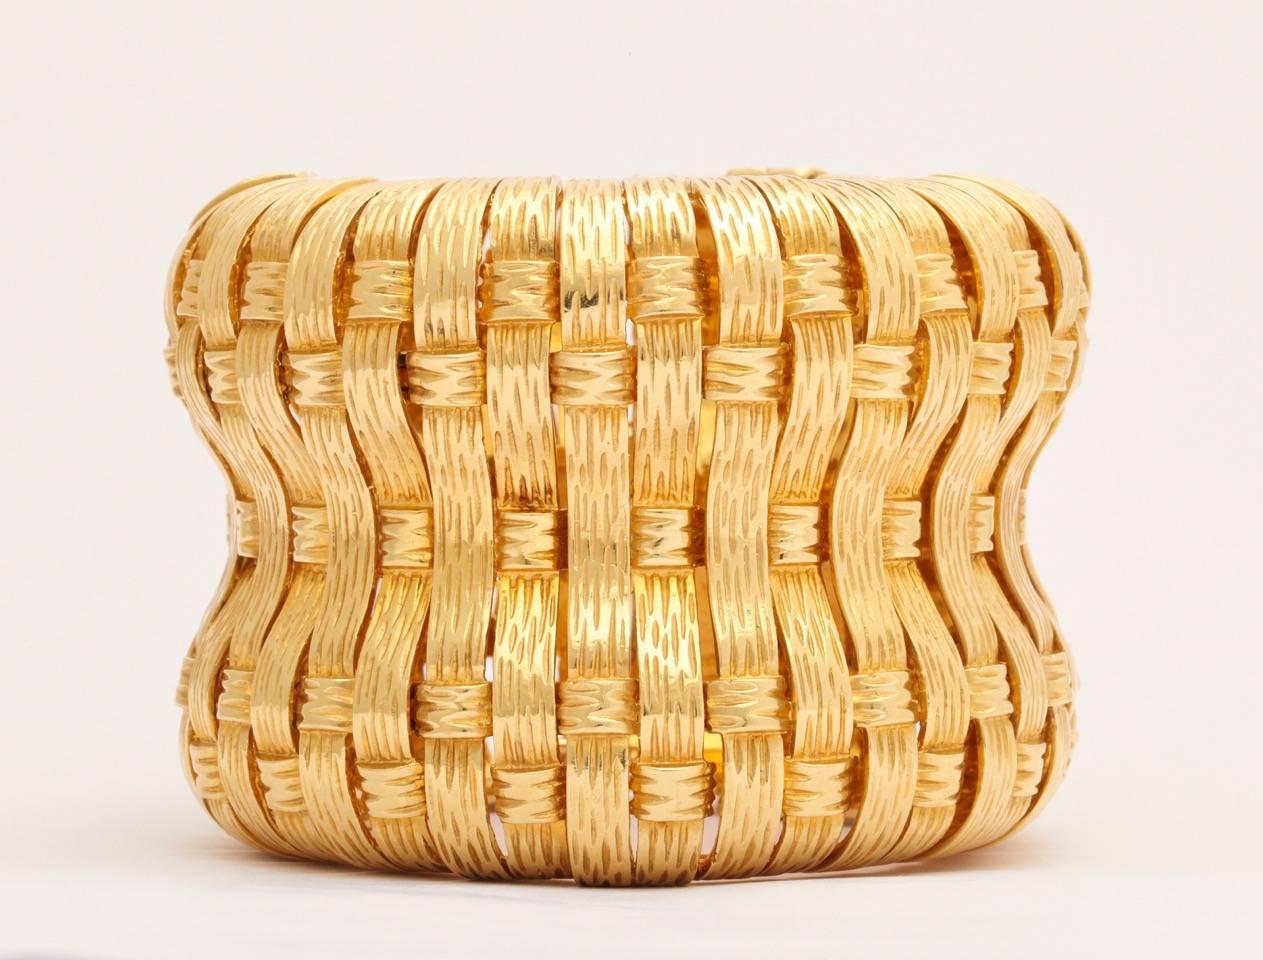 A magnificent 1970s large solid basketweave design 18Karat gold cuff bracelet
that has a stunning measurement of a total width of two and half inches wide and eight inches long one inch deep  to accommodate the width and curvature of the cuff. Each